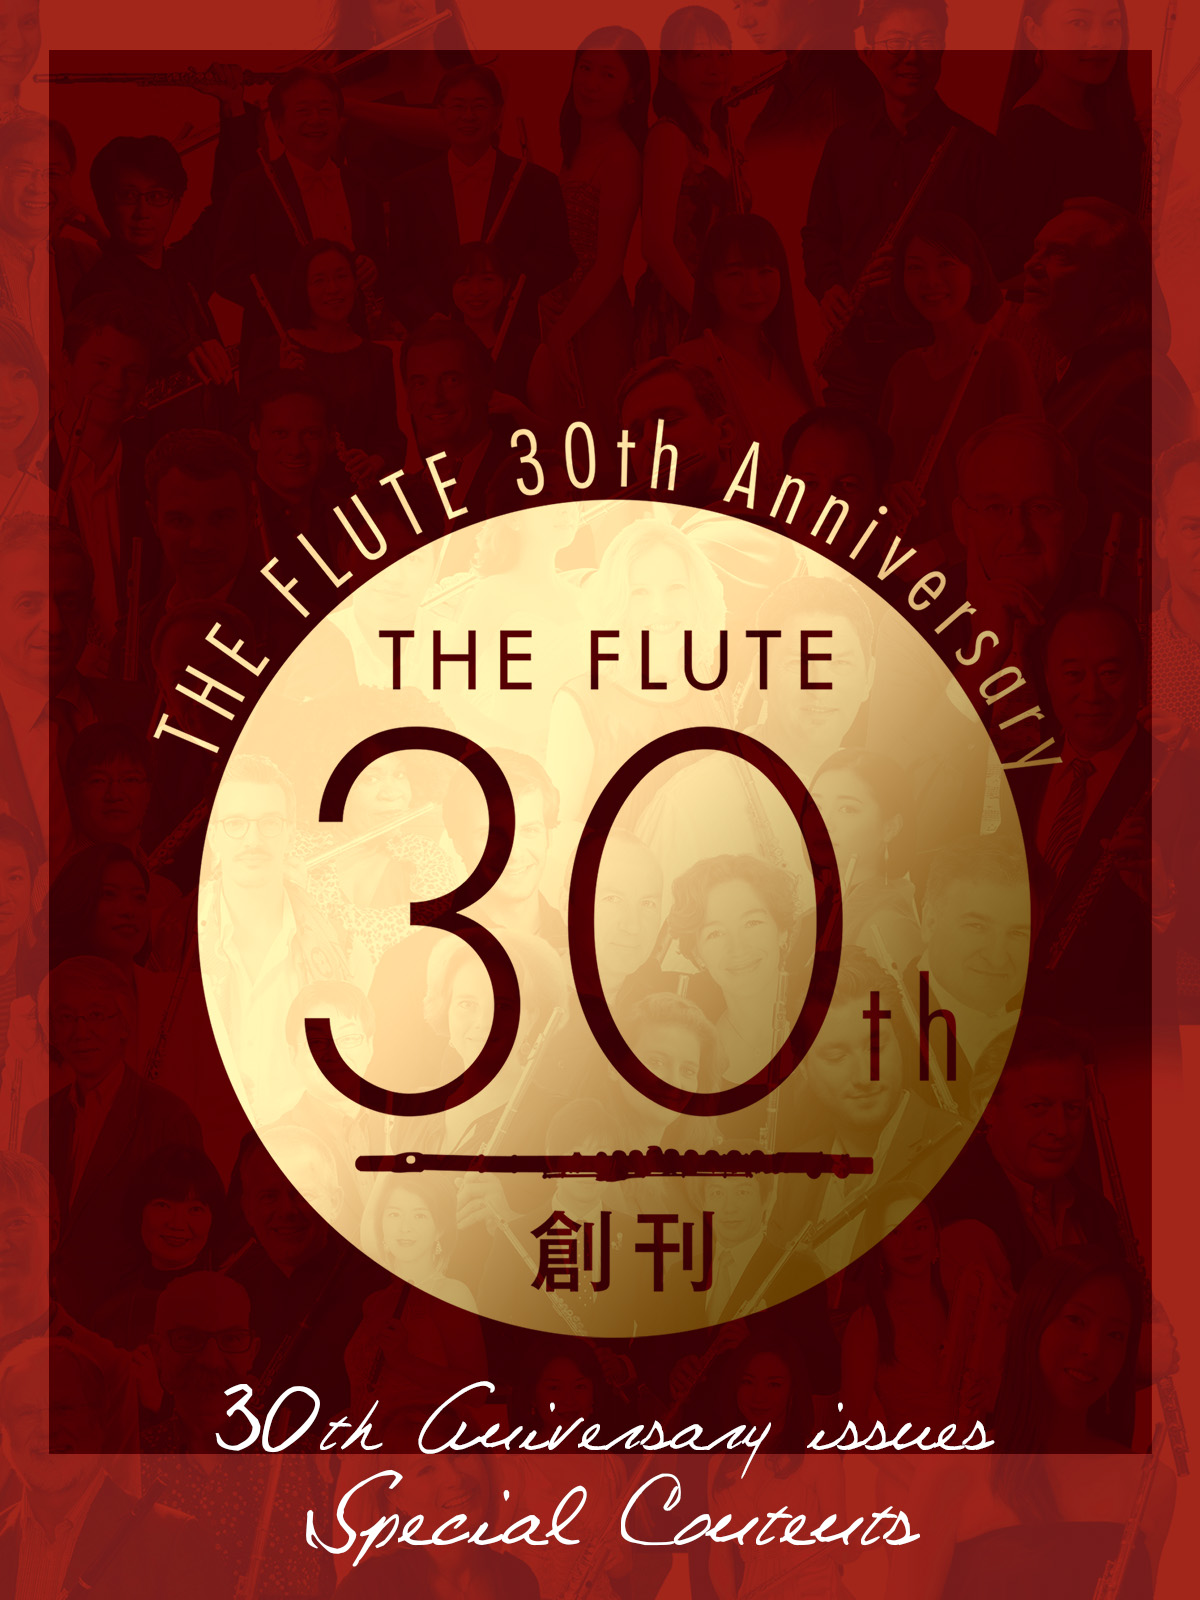 THE FLUTE 30th anniversary special contents